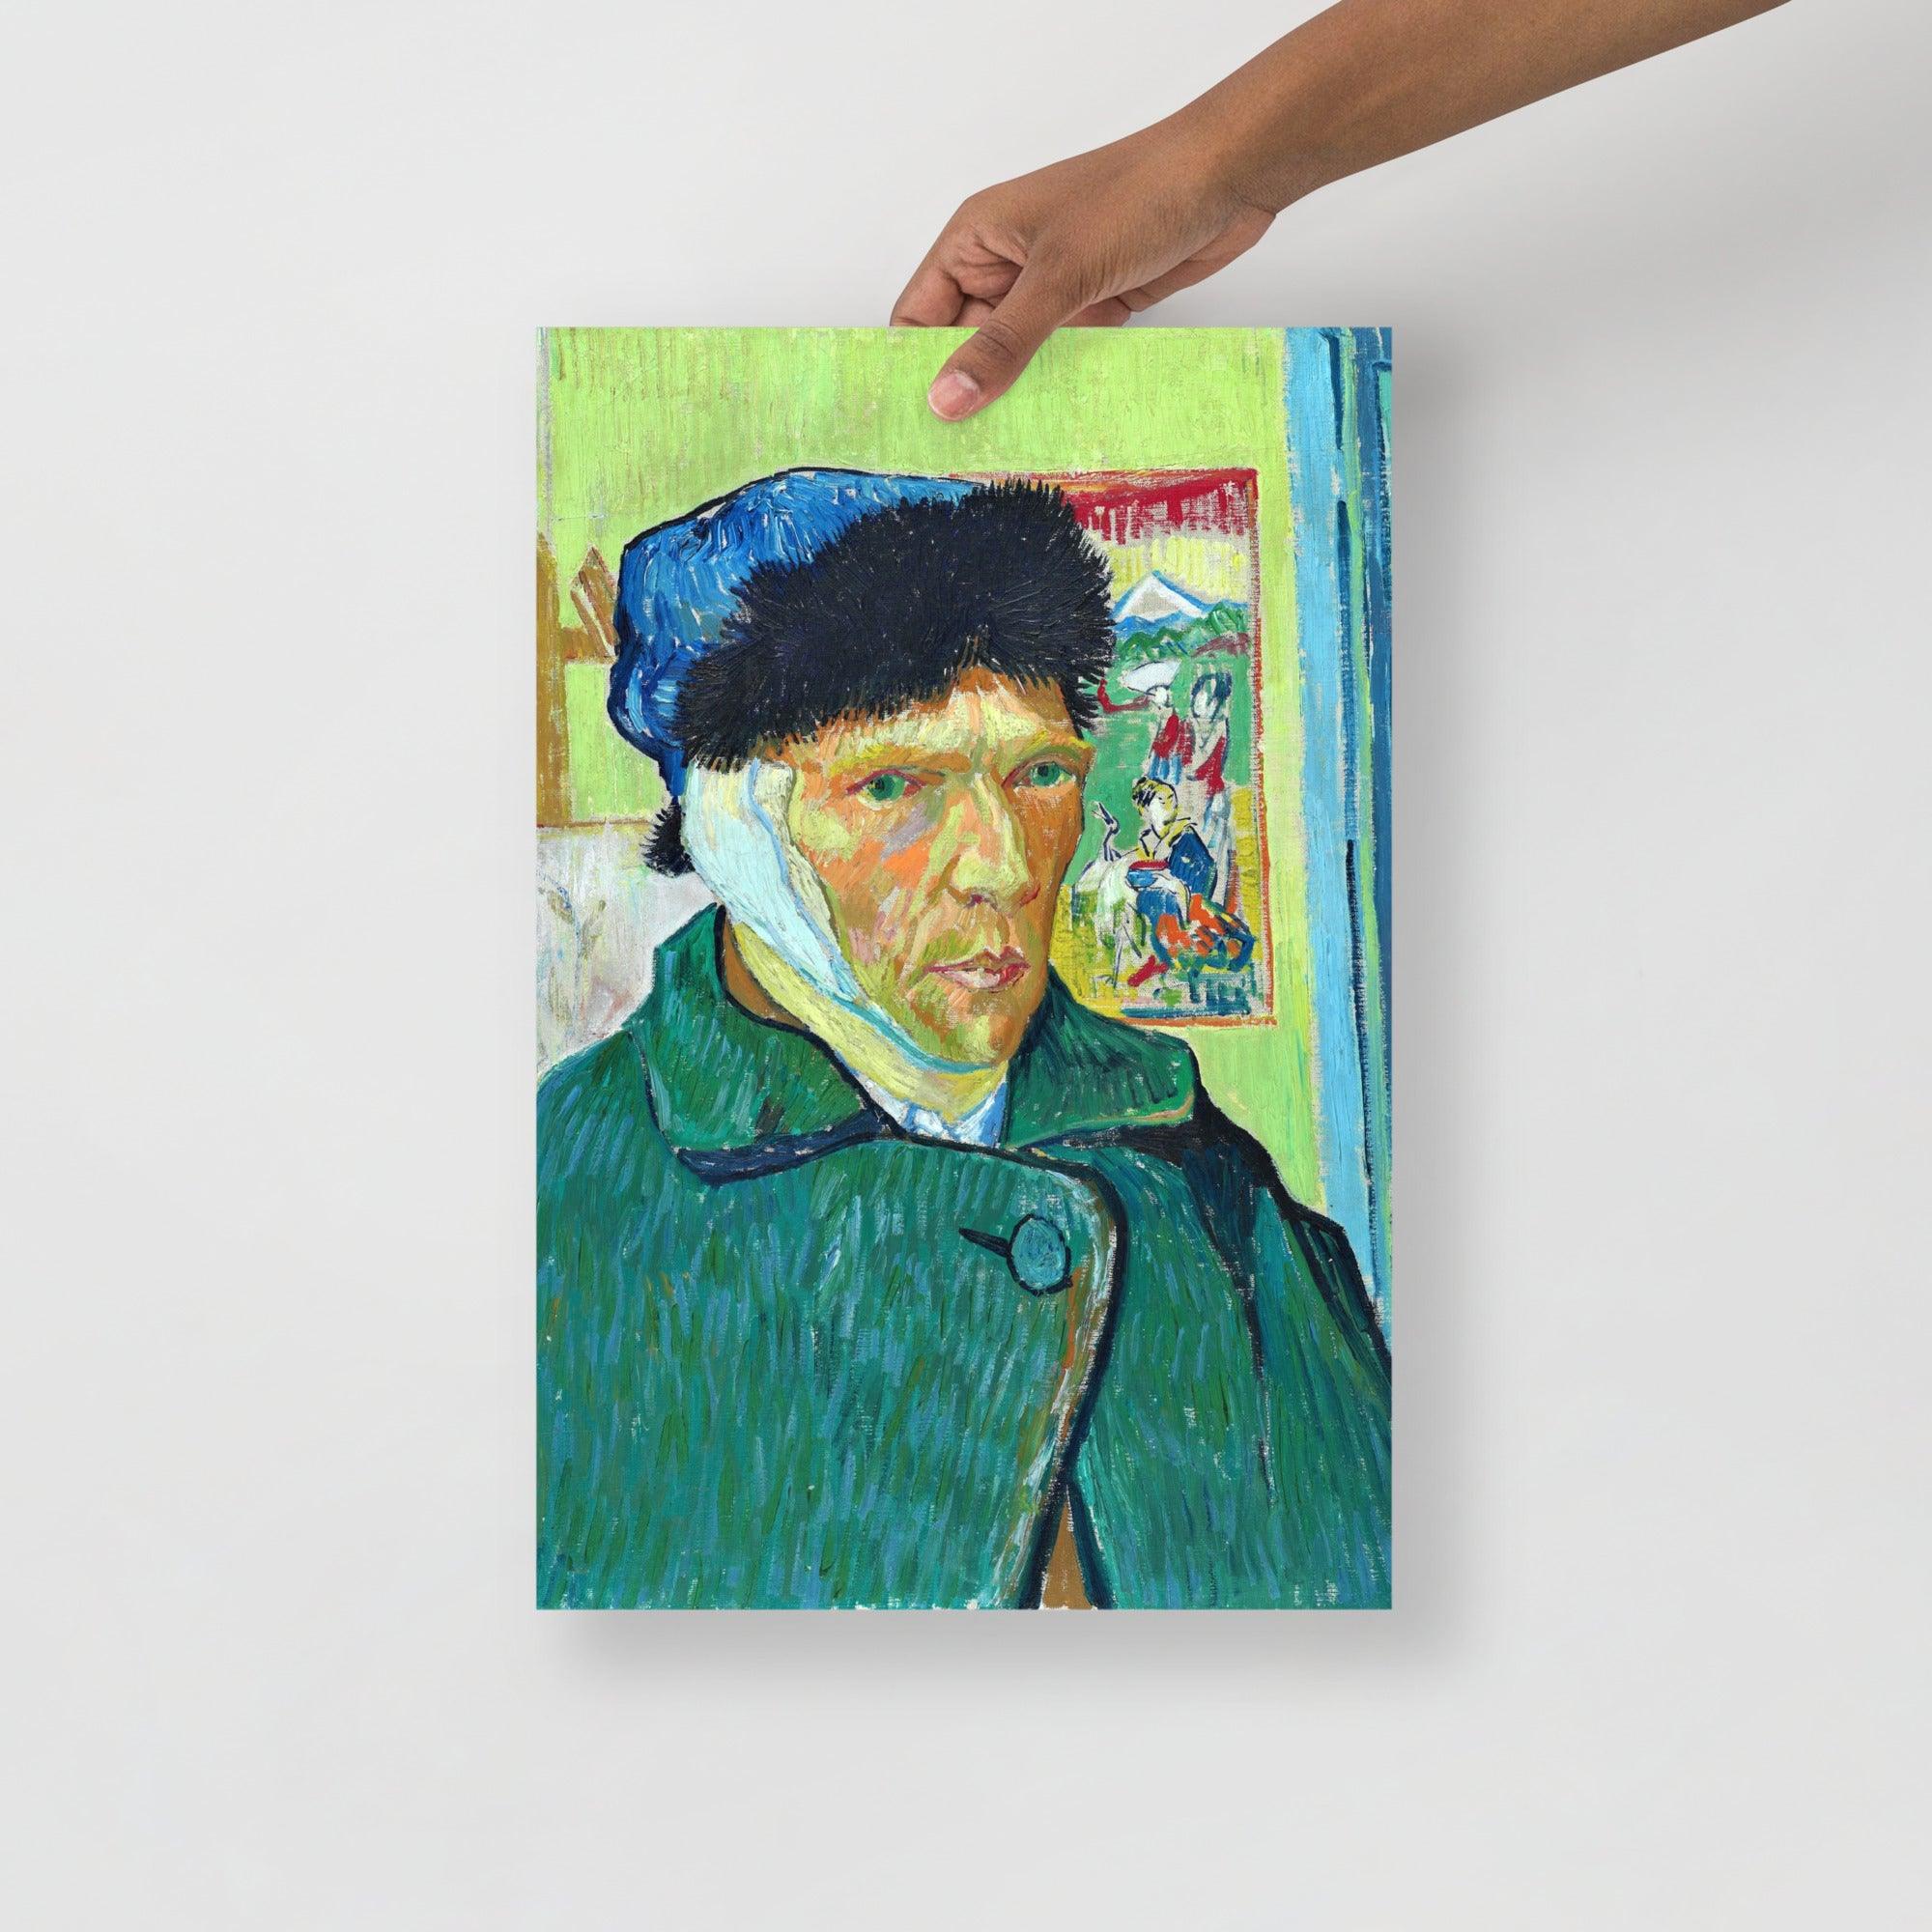 A Self Portrait With Bandaged Ear by Vincent Van Gogh poster on a plain backdrop in size 12x18”.